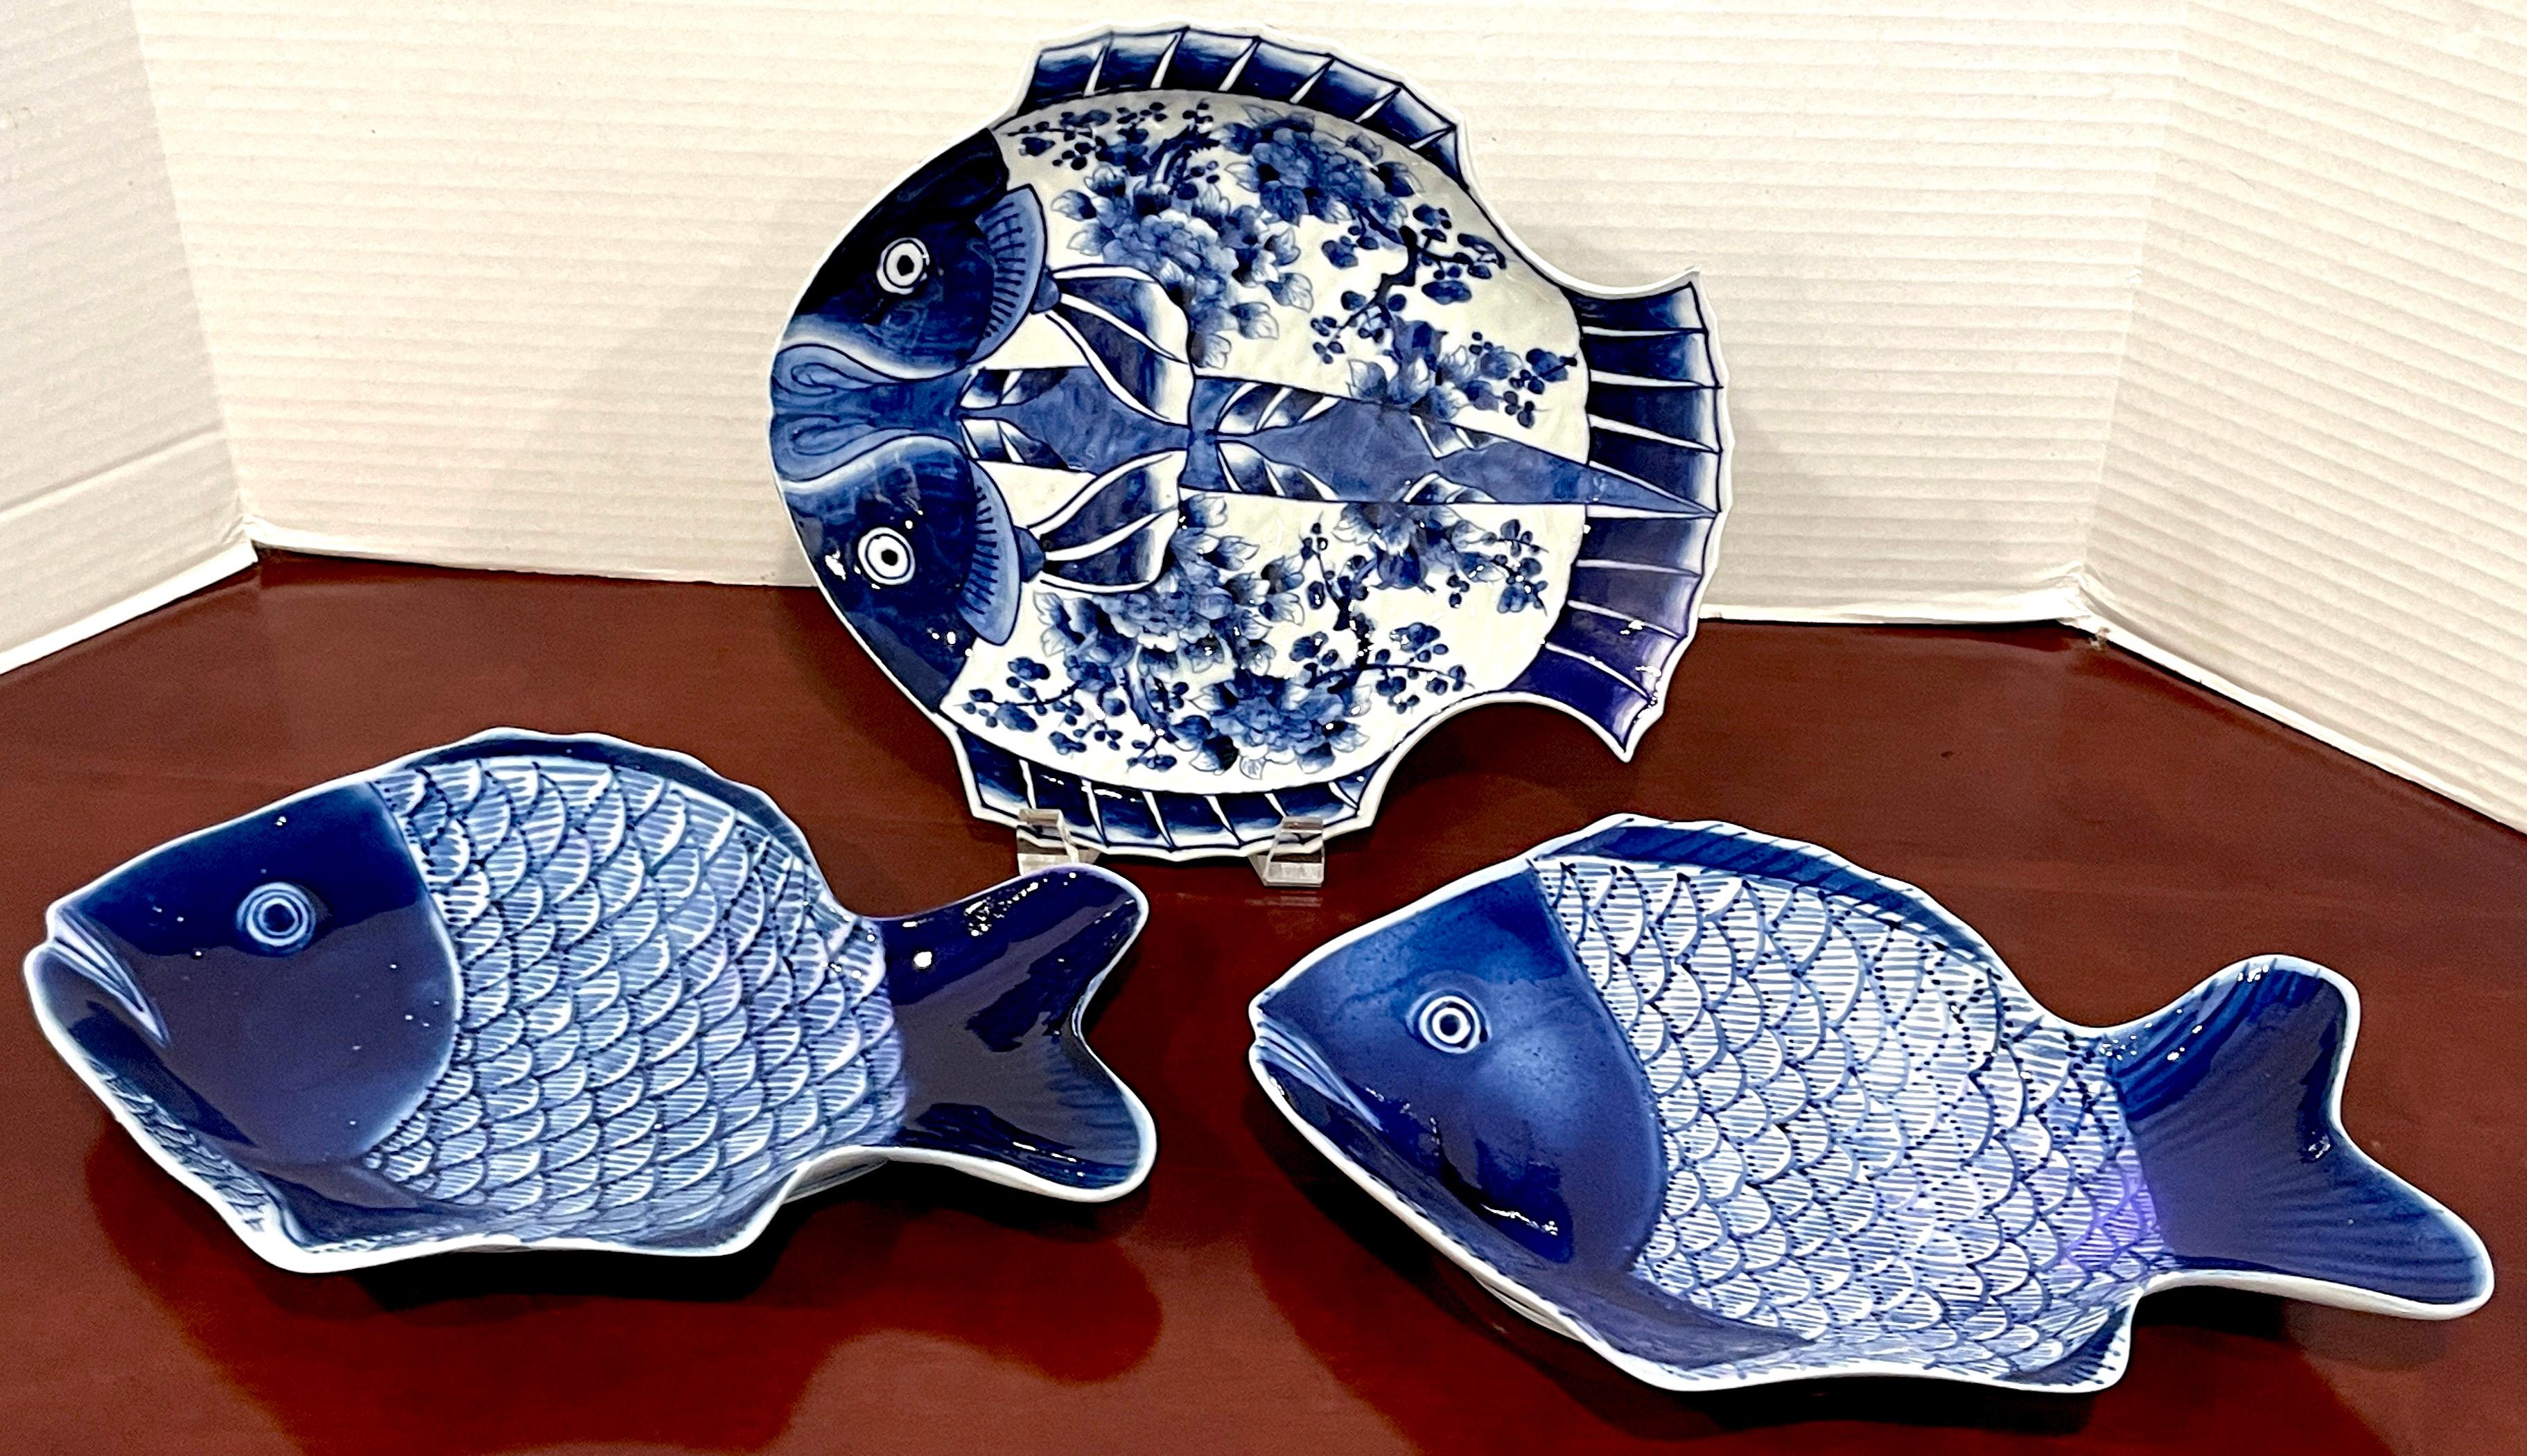 Three Meiji Period Fukagawa blue & white fish plates.
Japan Circa 1900s
A three piece collection consisting of one rare two headed blue and white signed Fukagawa fish plate measuring 11 inches-wide x 10-inches high
Two similar blue and white fish